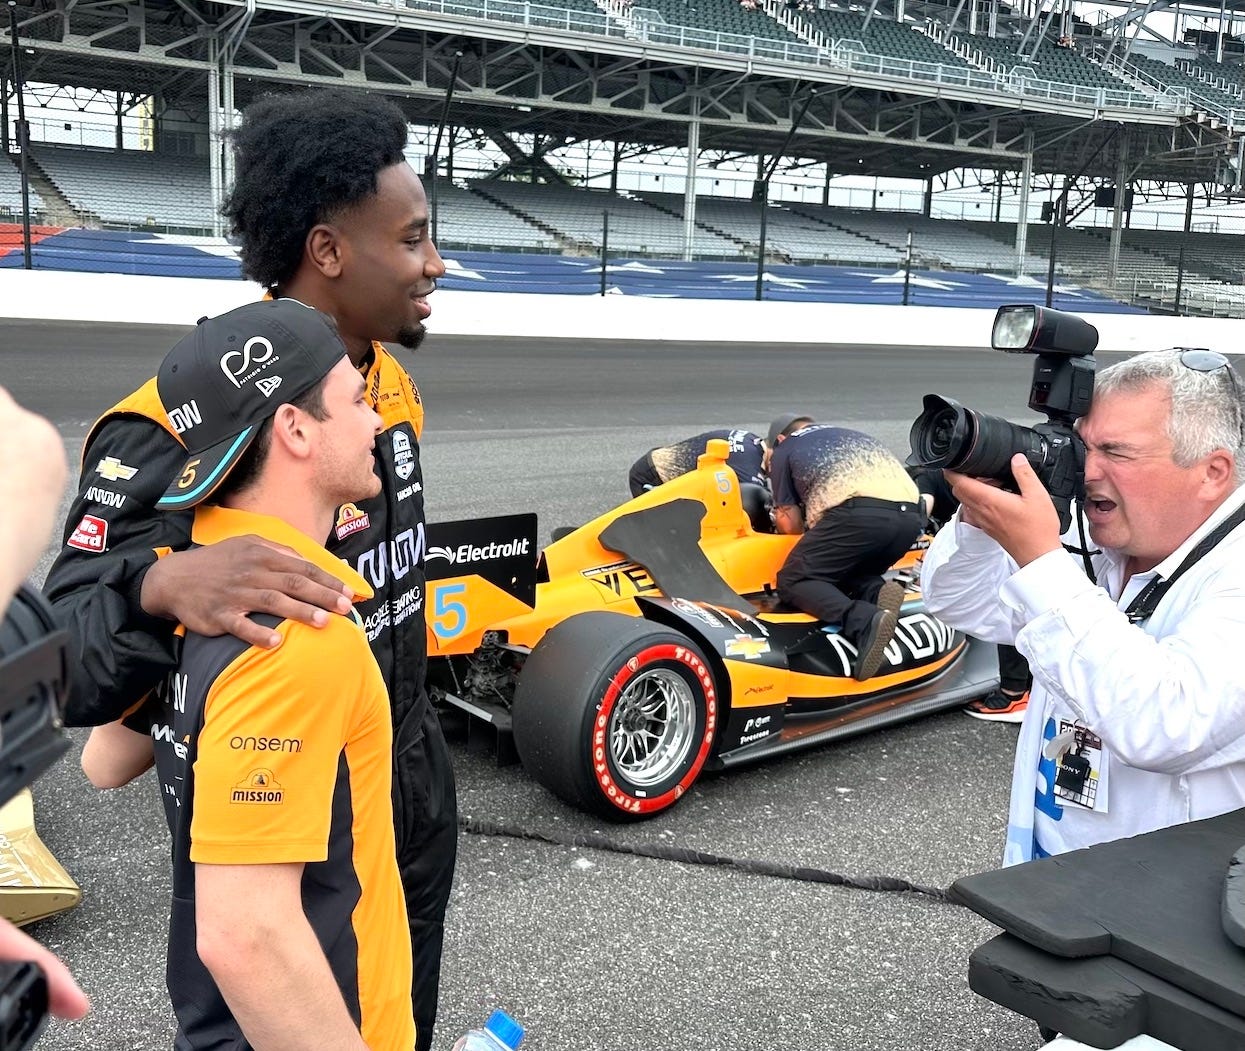 IndyCar driver Pato O'Ward poses for a photo with Aaron Nesmith of the Pacers on the track at the Indianapolis Motor Speedway Saturday morning.